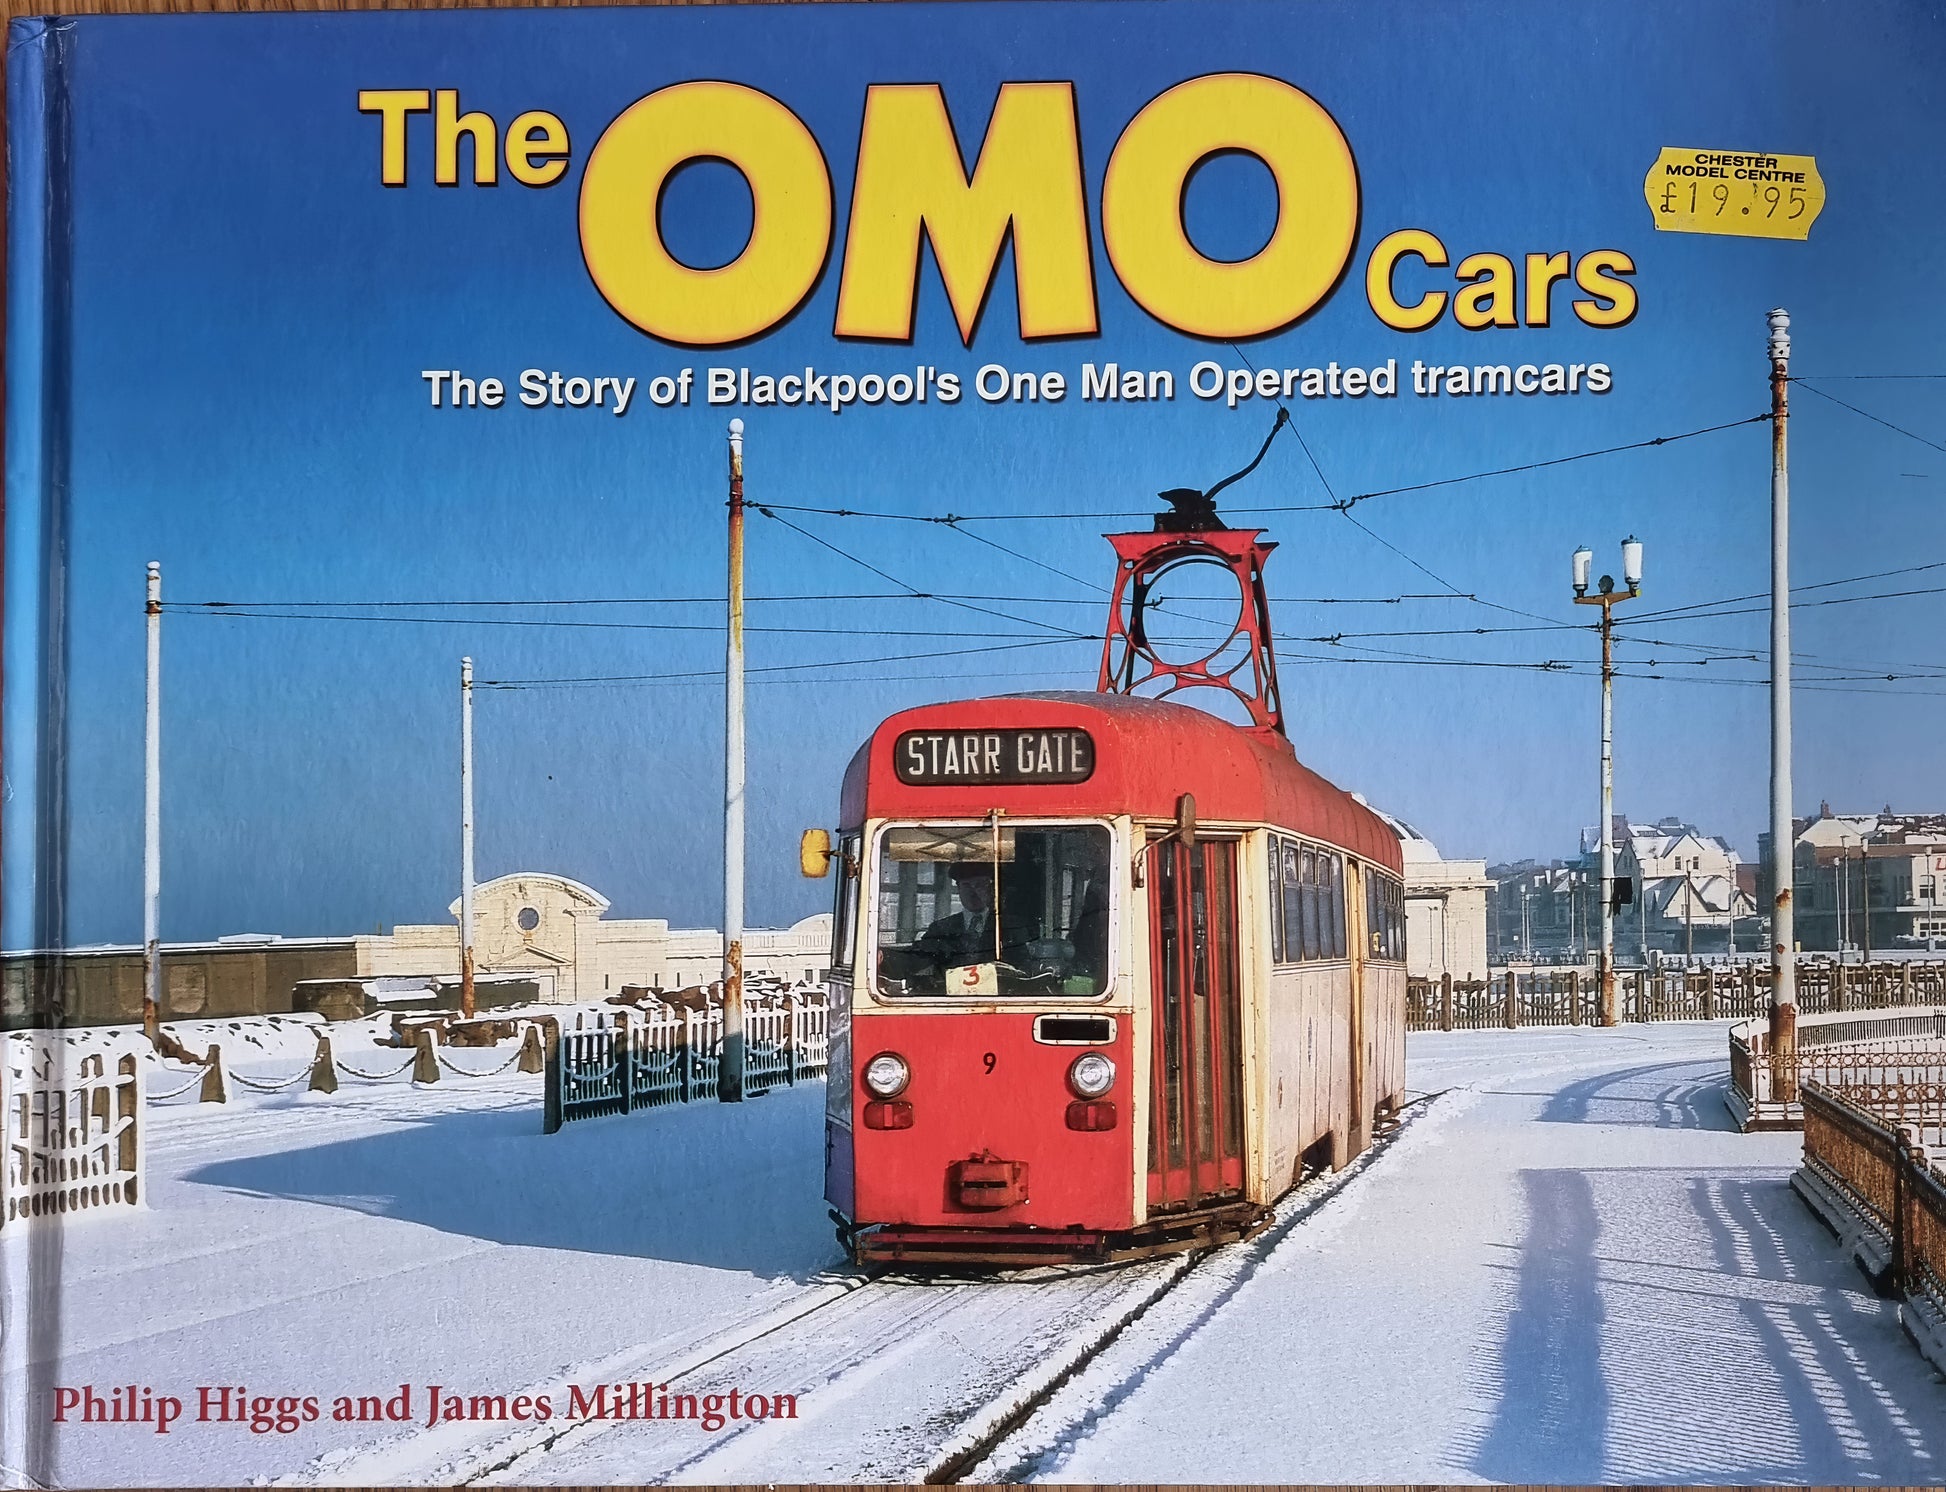 The OMO Cars : The story of Blackpool’s one man operated tram cars - Philip Higgs and James Millington - Chester Model Centre